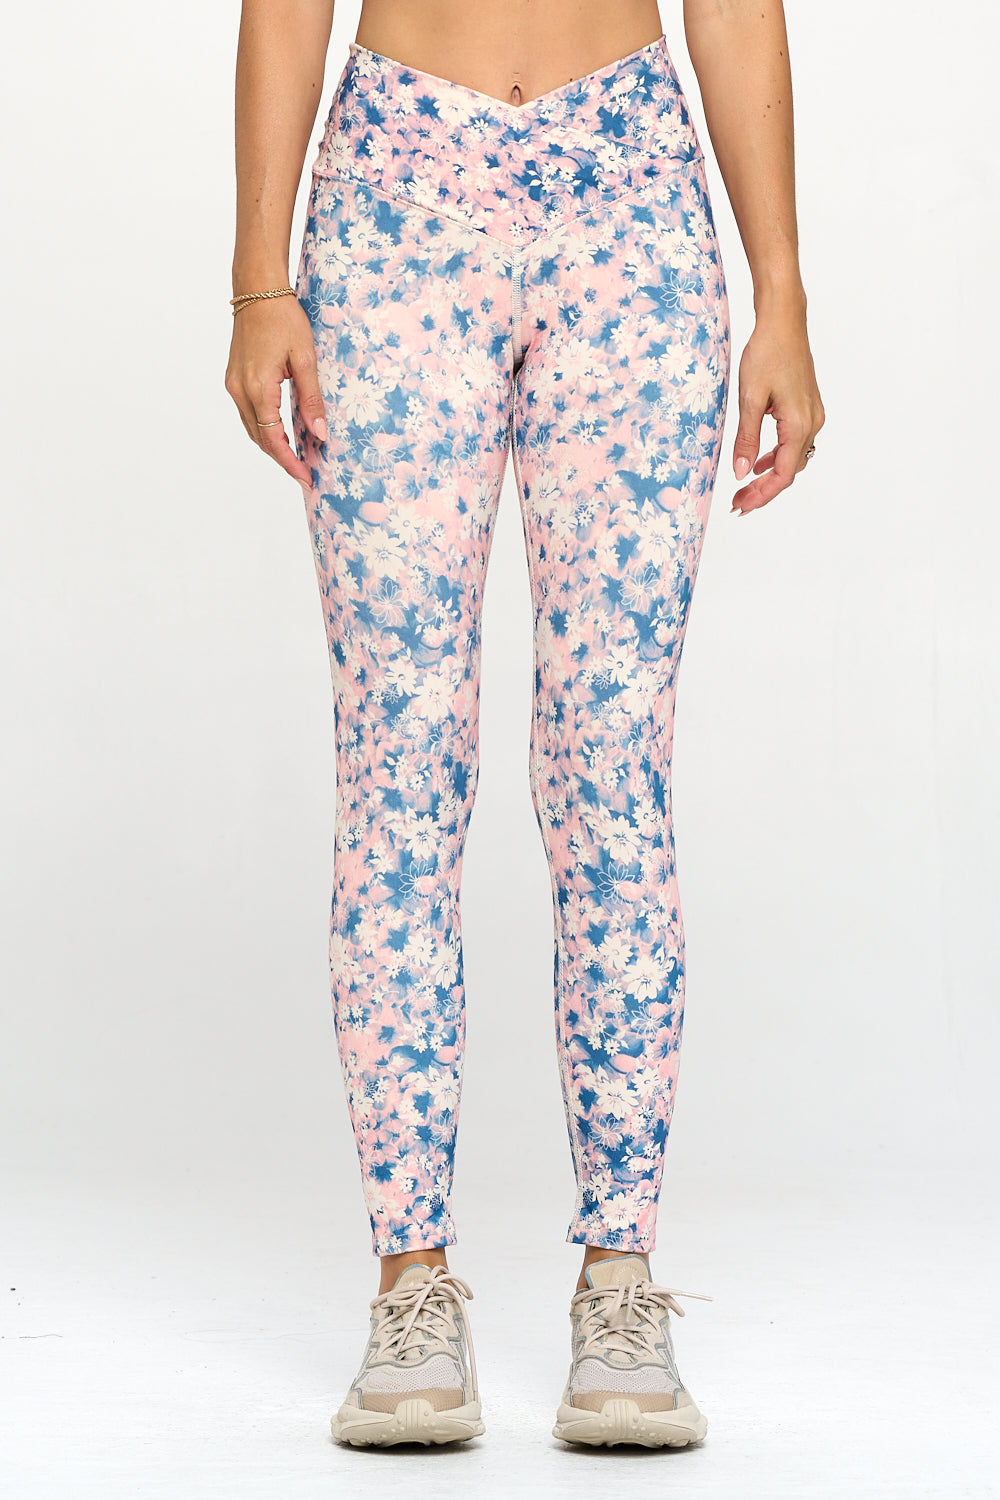 Tate - Cotton Candy Floral Garden Crossover Full-Length Legging (High- –  EVCR